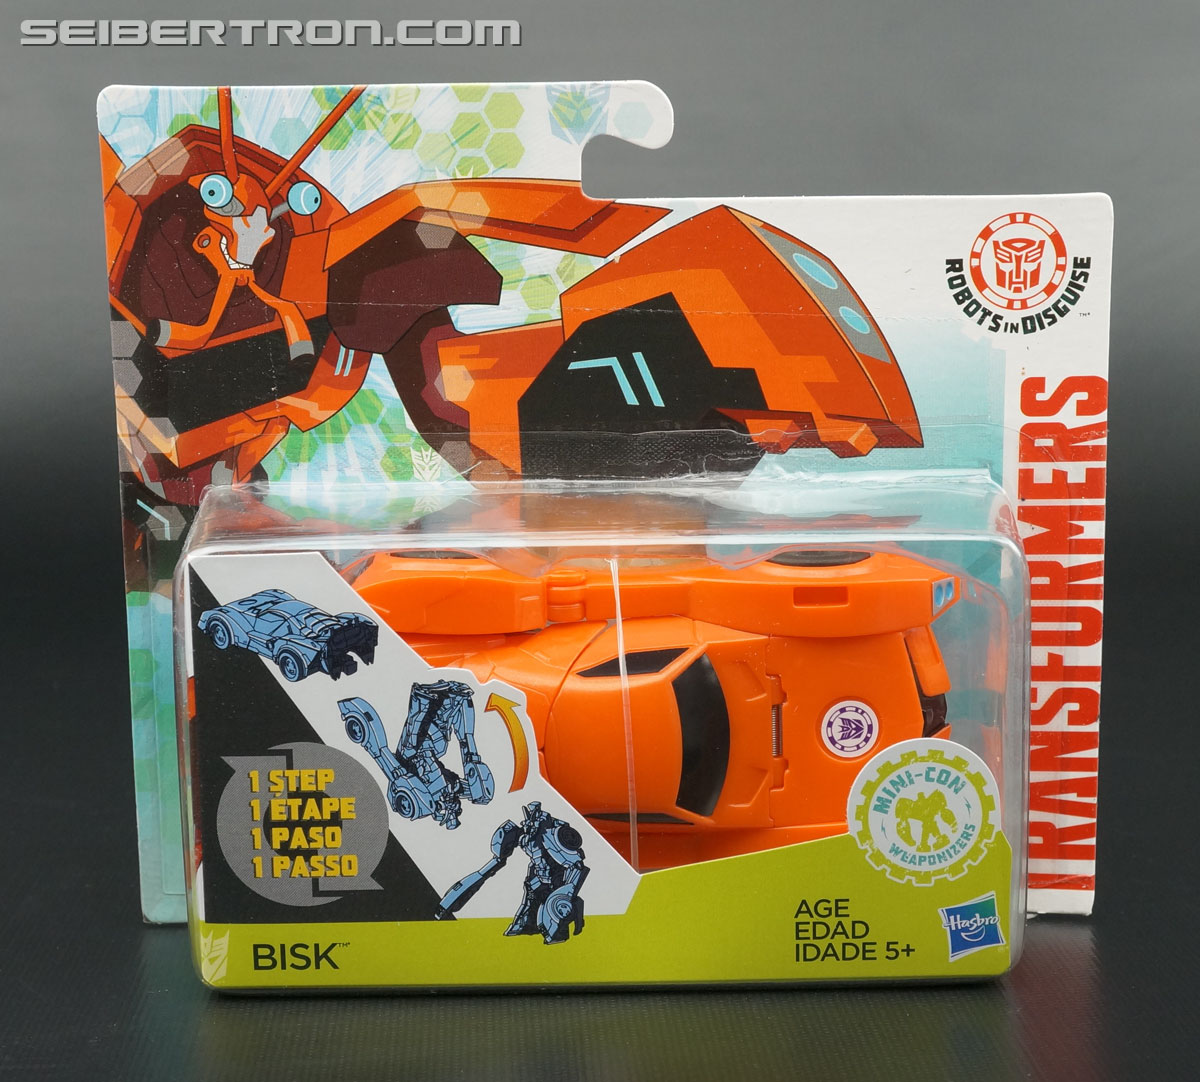 Transformers: Robots In Disguise Bisk (Image #1 of 80)